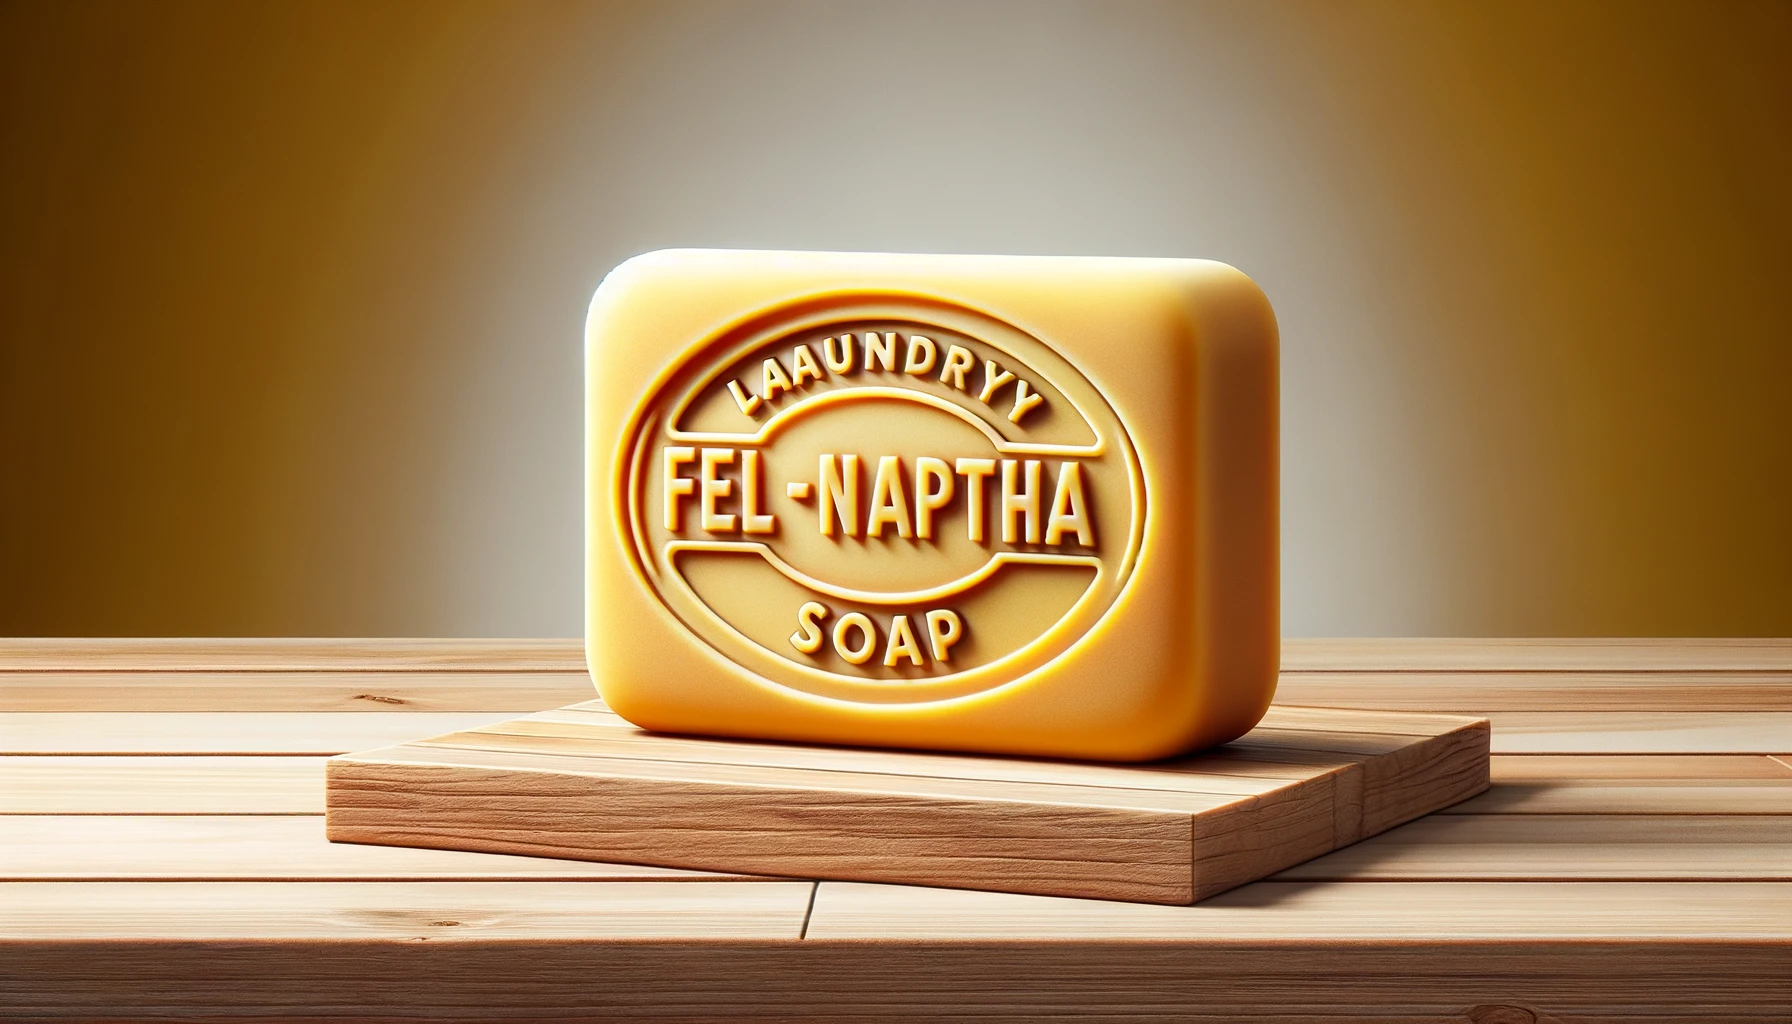 A yellow bar of Fels-Naptha laundry soap with embossed lettering on a wooden surface